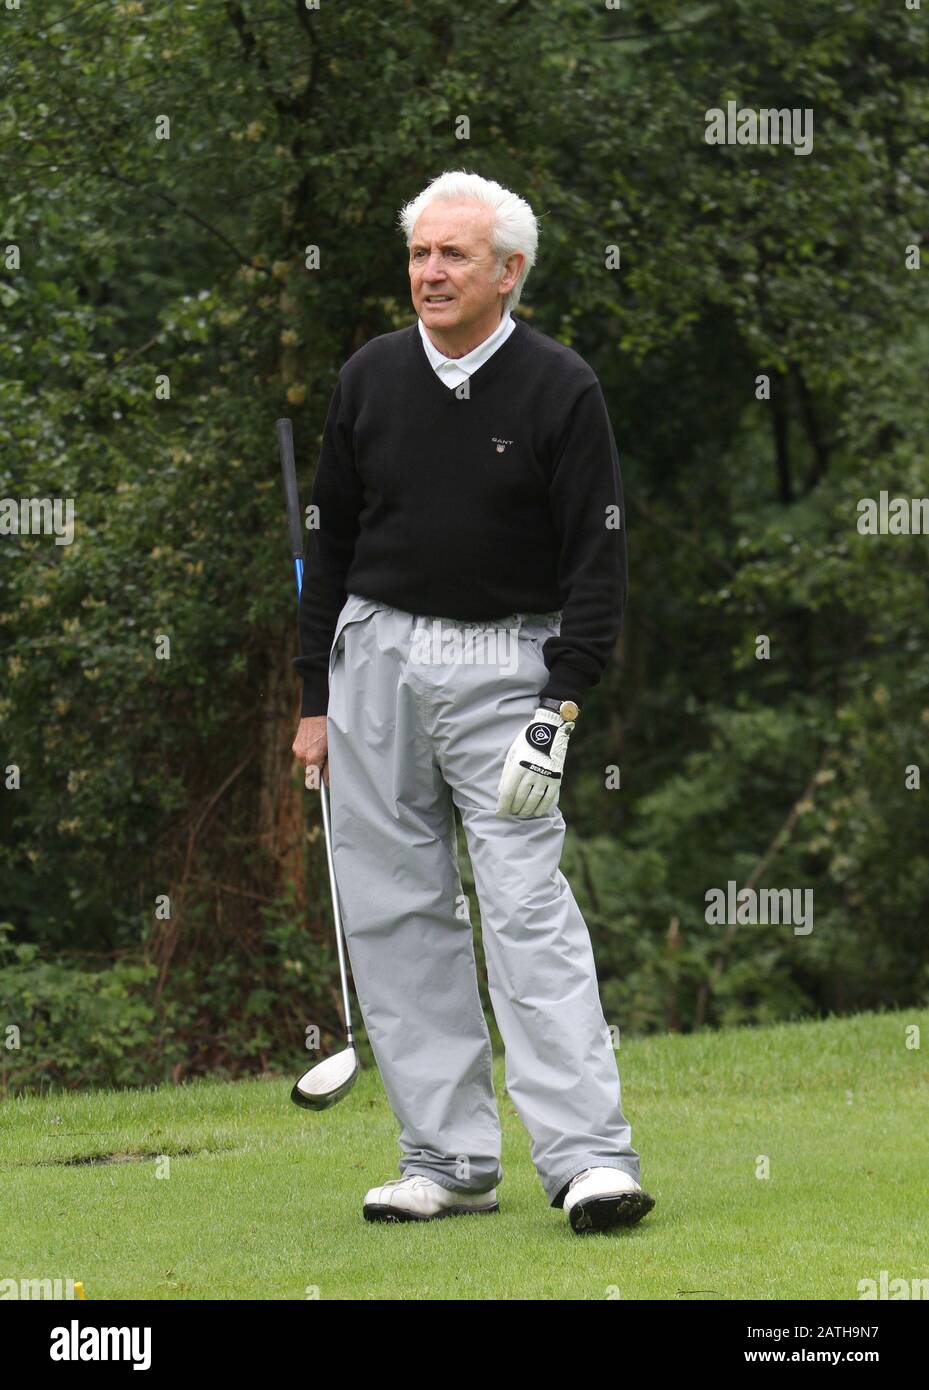 Tony Christie Singer competes at 'Golf with the Stars' held at Wentworth Golf club, Surrey, England. Stock Photo